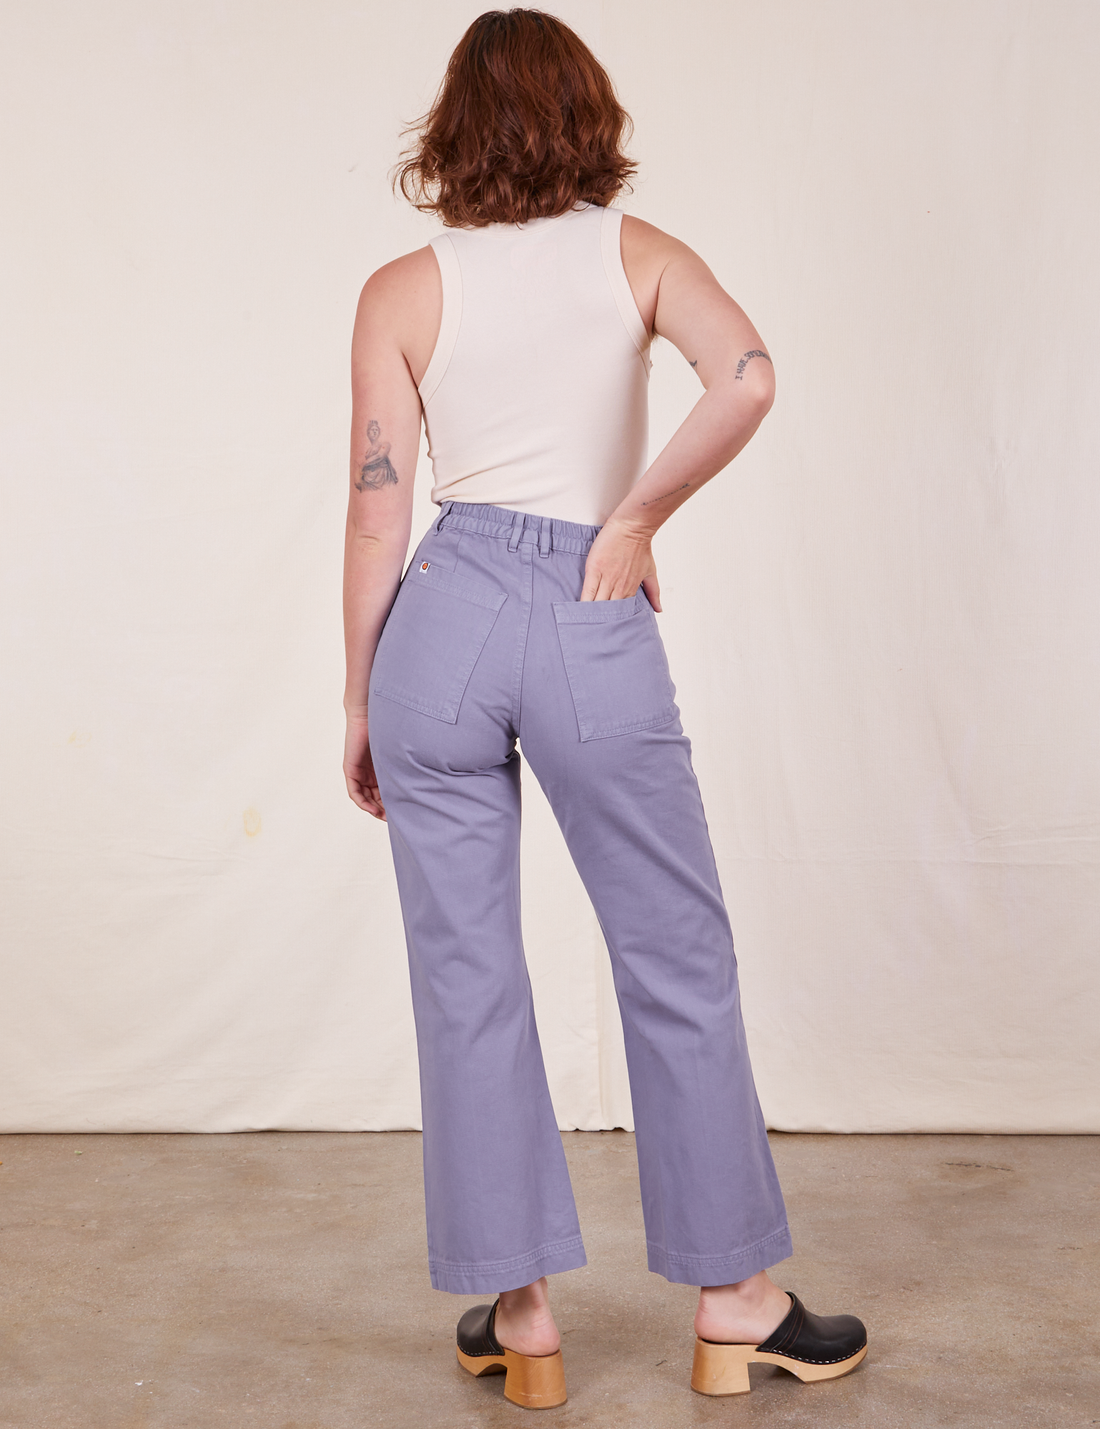 Back view of Western Pants in Faded Grape and vintage off-white Tank Top worn by Alex